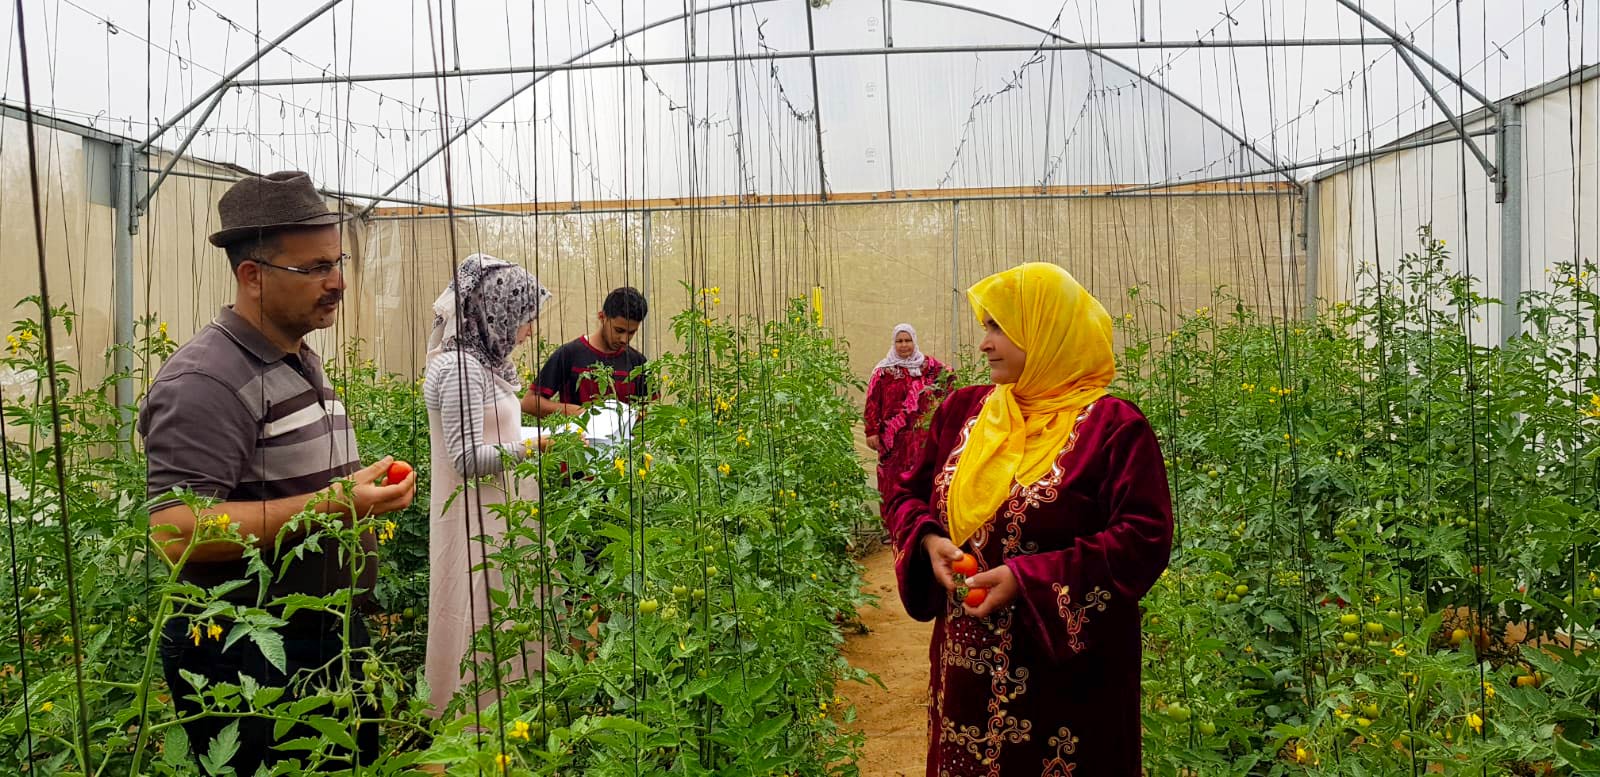 Naser Qadous, Anera's Agriculture Programs Manager, talks with Amena about best farming practices inside her greenhouse.